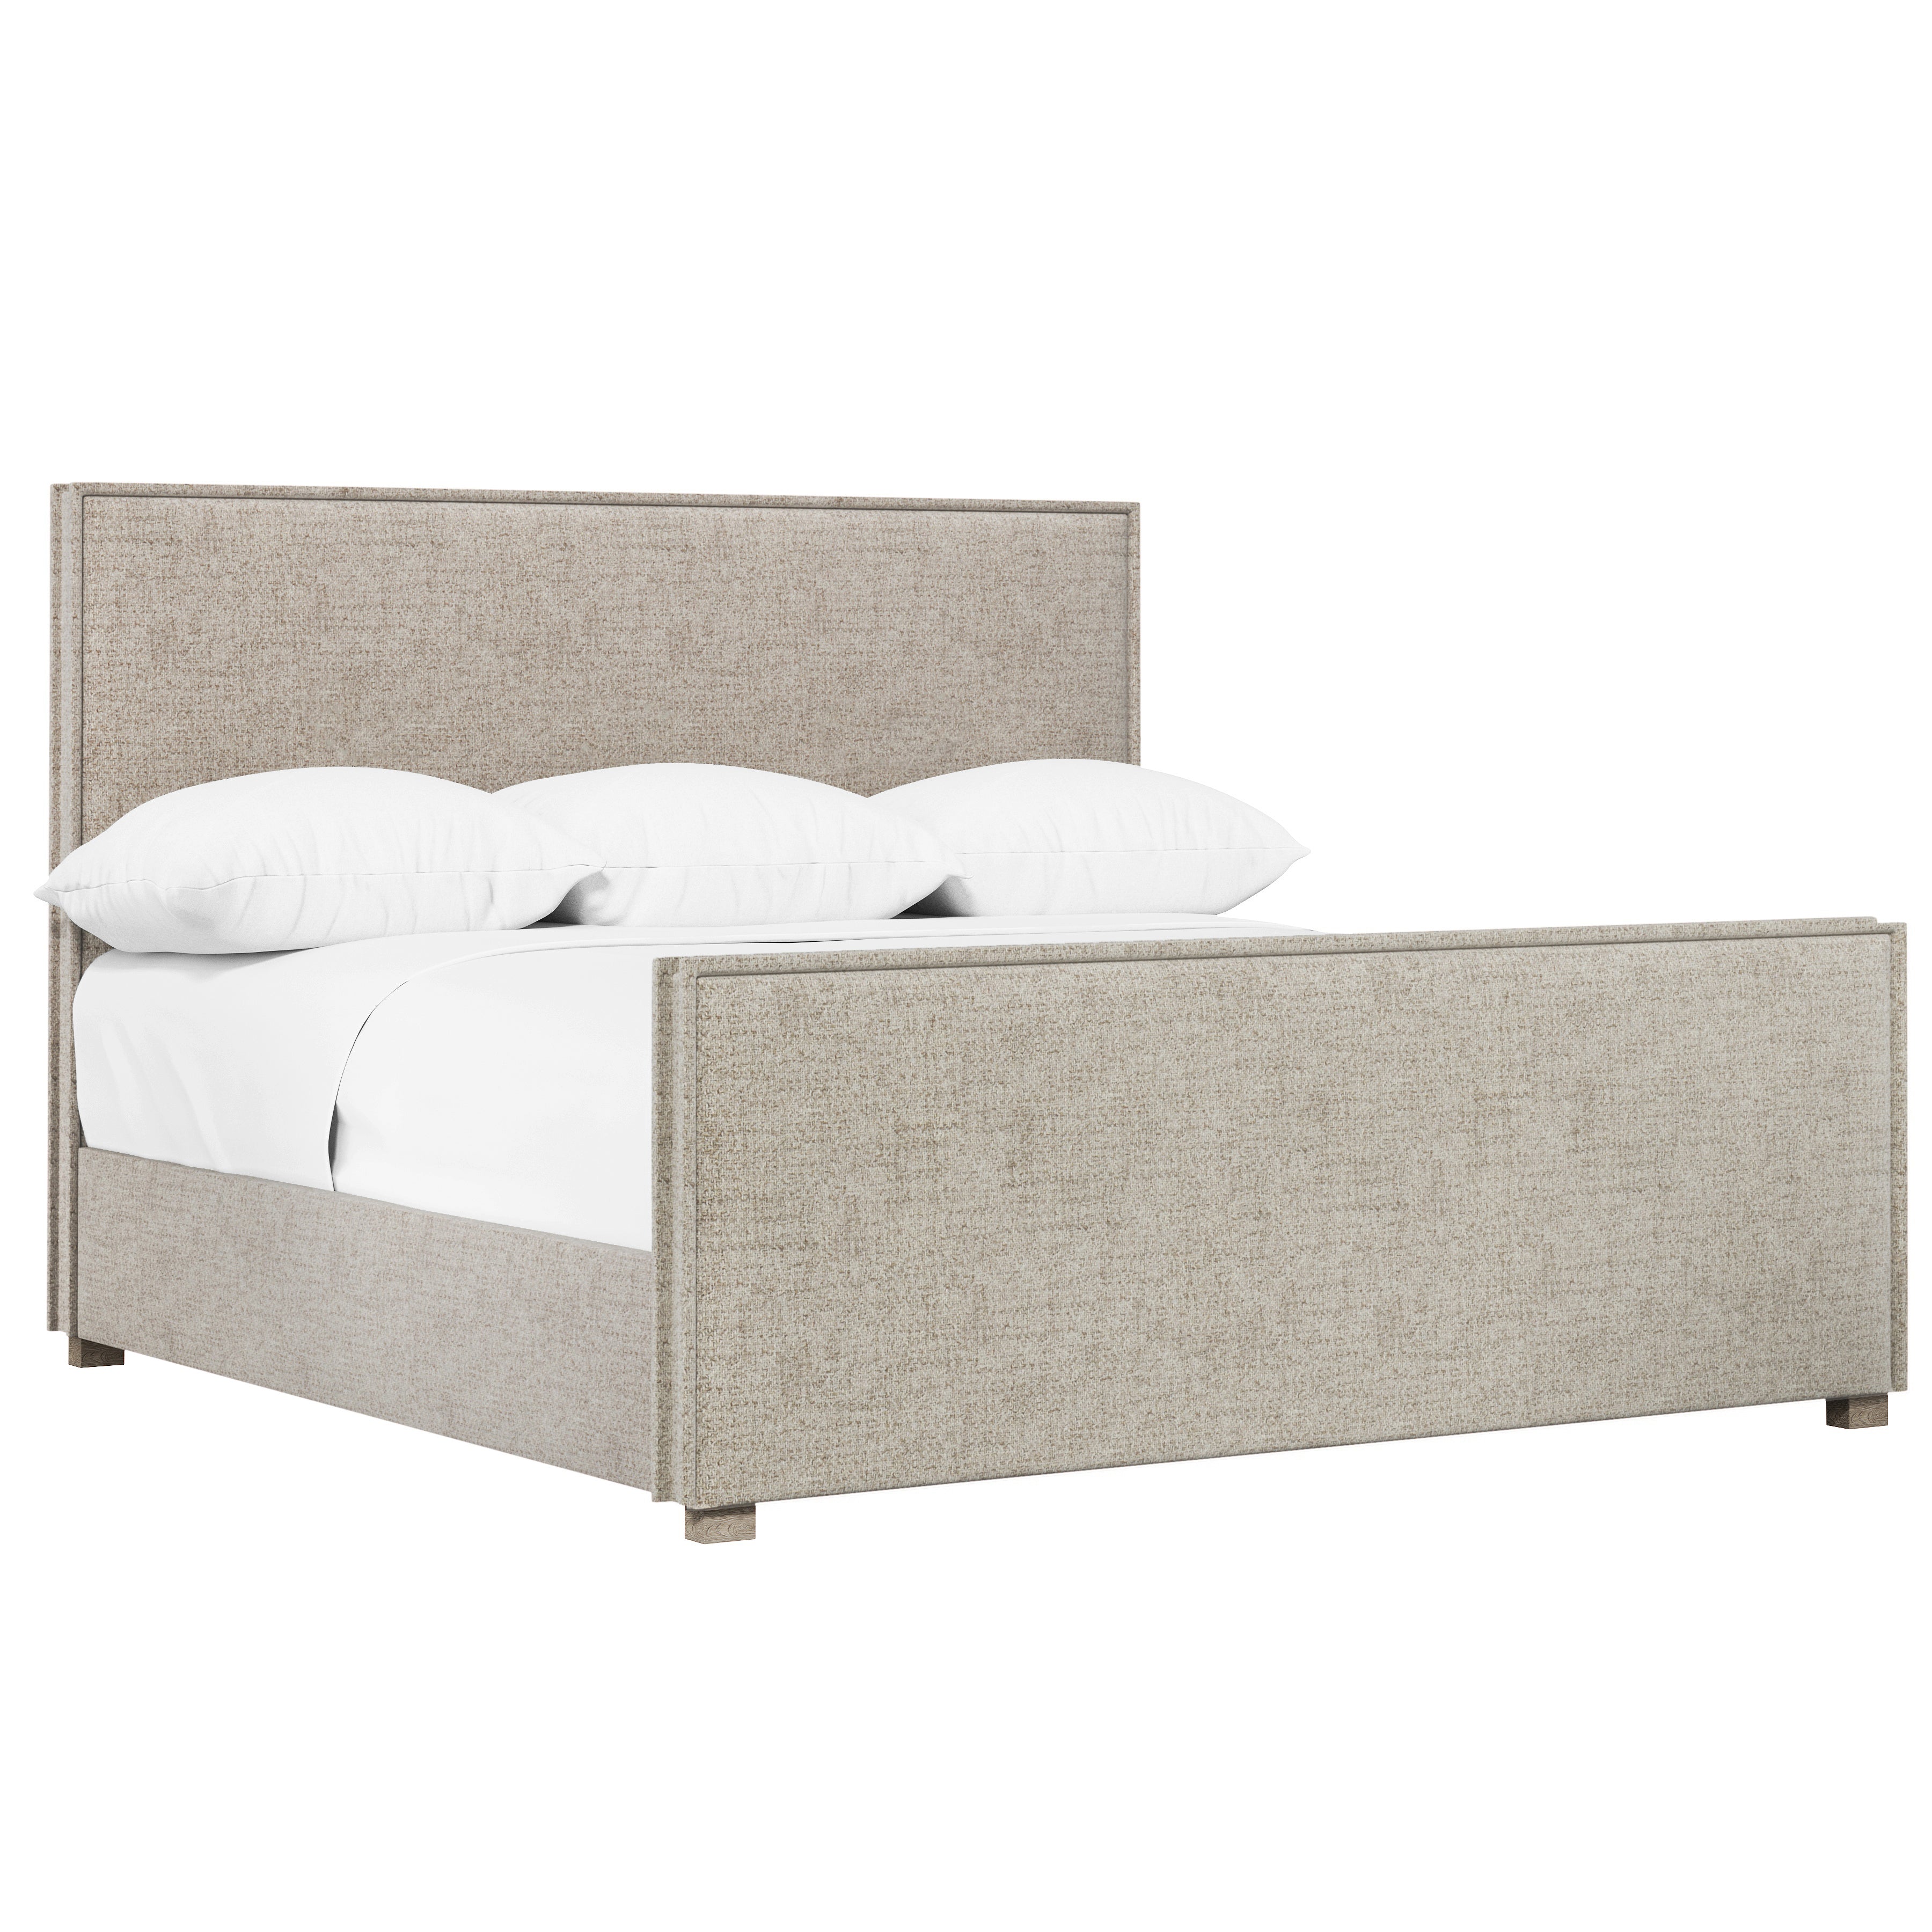 Sawyer King Panel Bed with Tan Upholstery